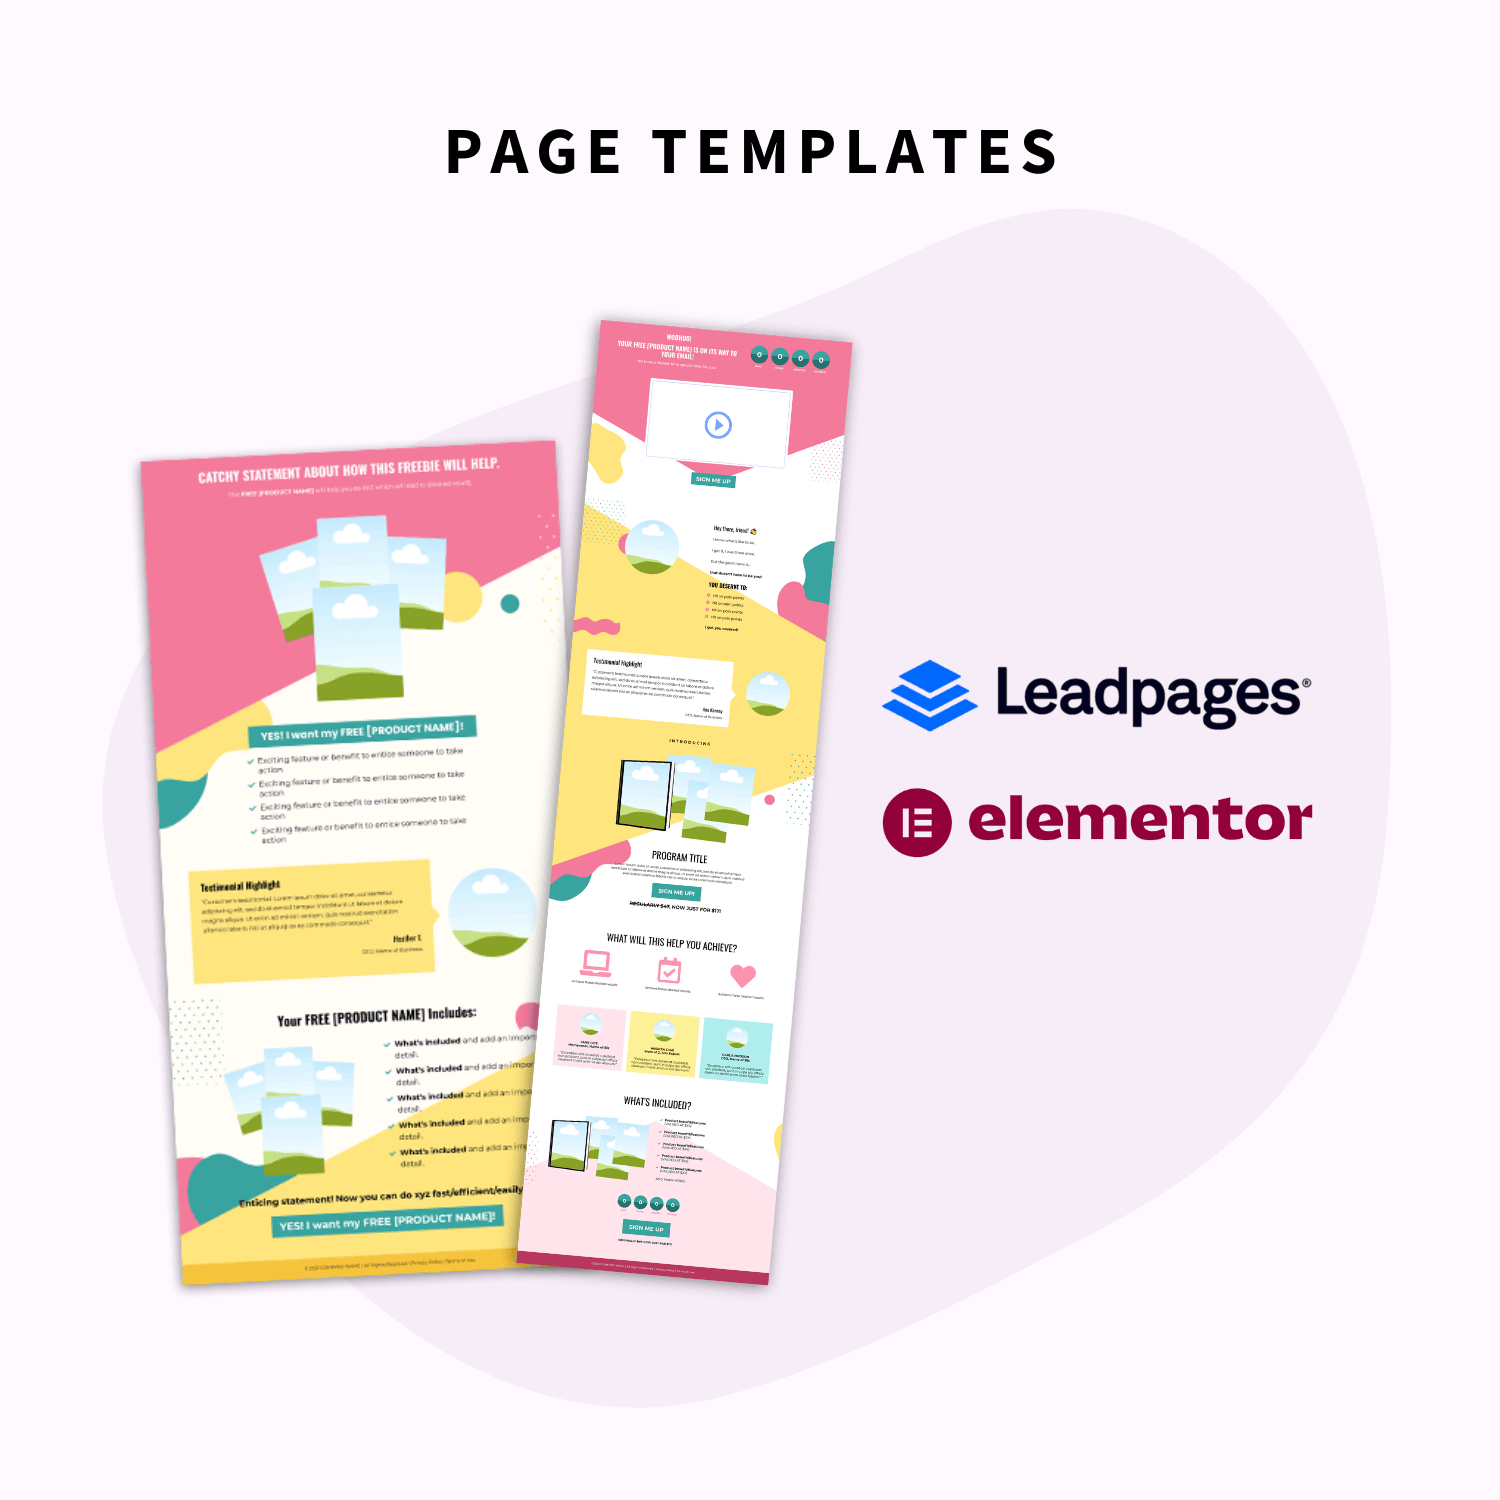 Page templates in the Summer Kick Off Prep Pack Toolbox - Elementor and Leadpages